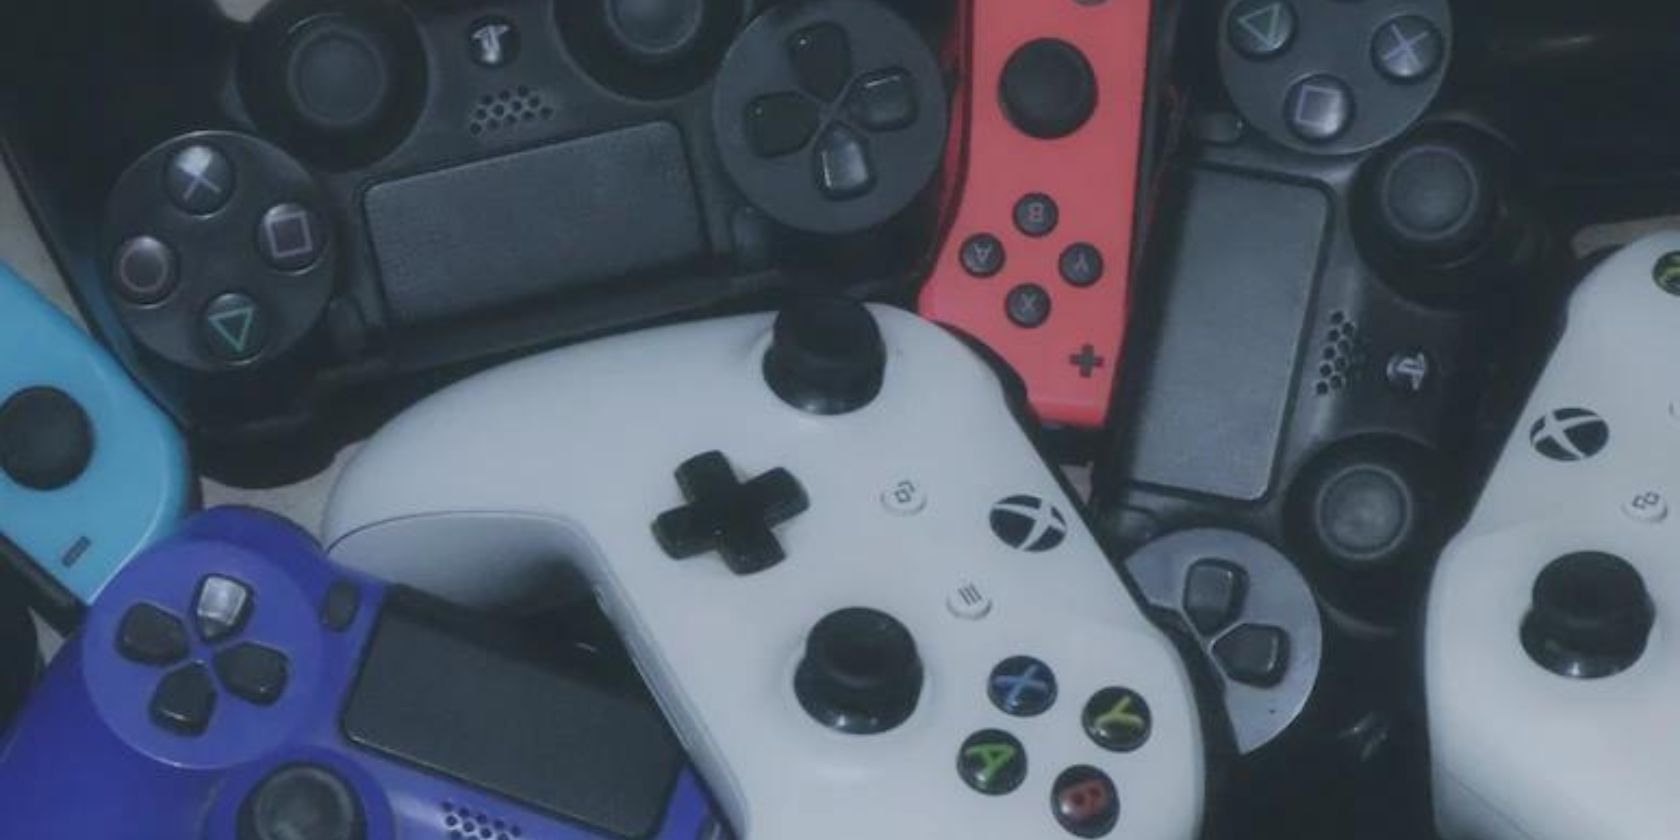 Close up shot of many different gaming controllers